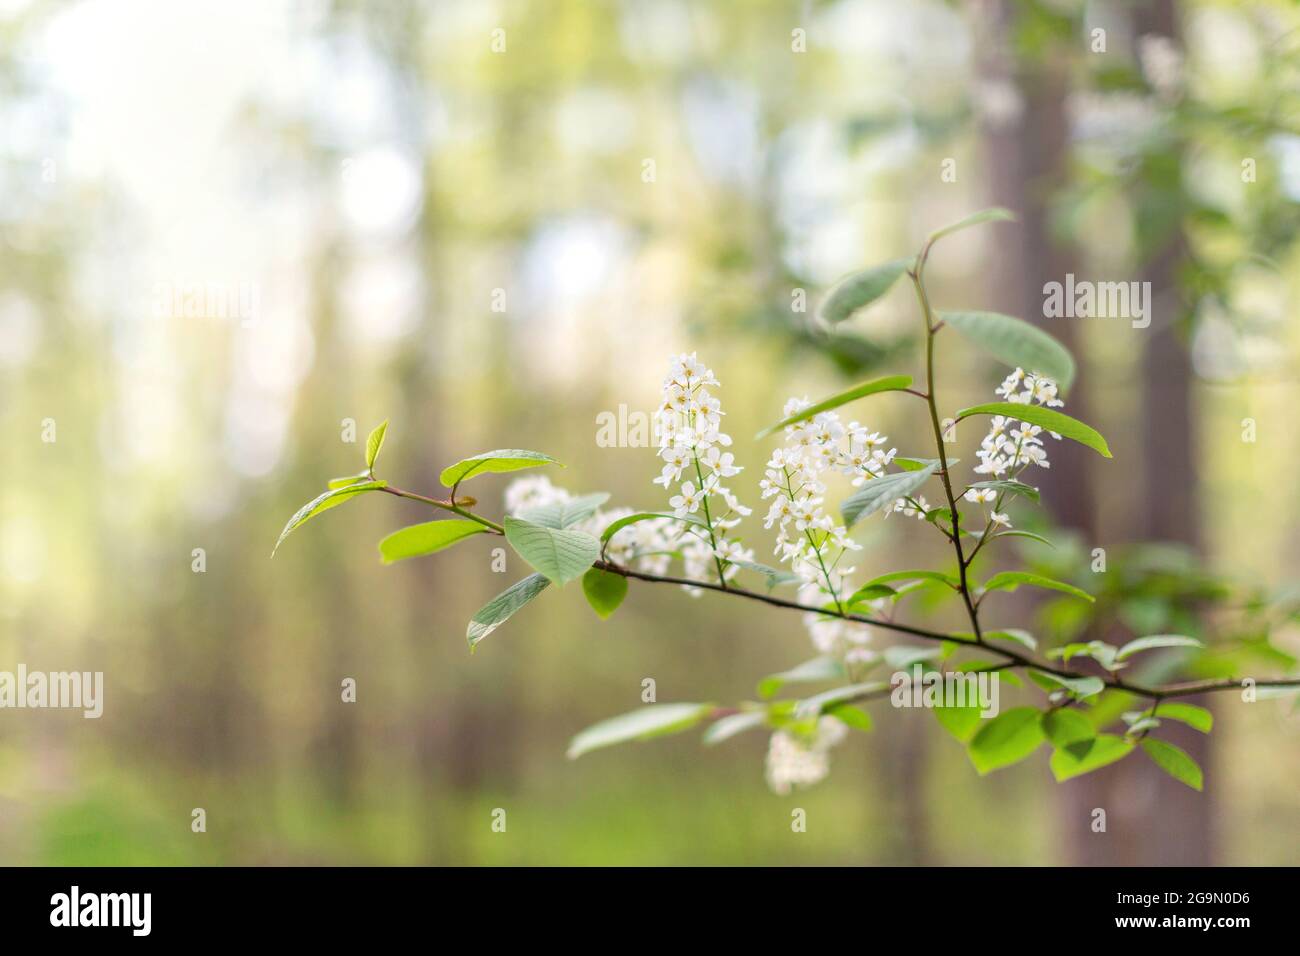 Blossoming twig in the forest during spring, springtime background Stock Photo